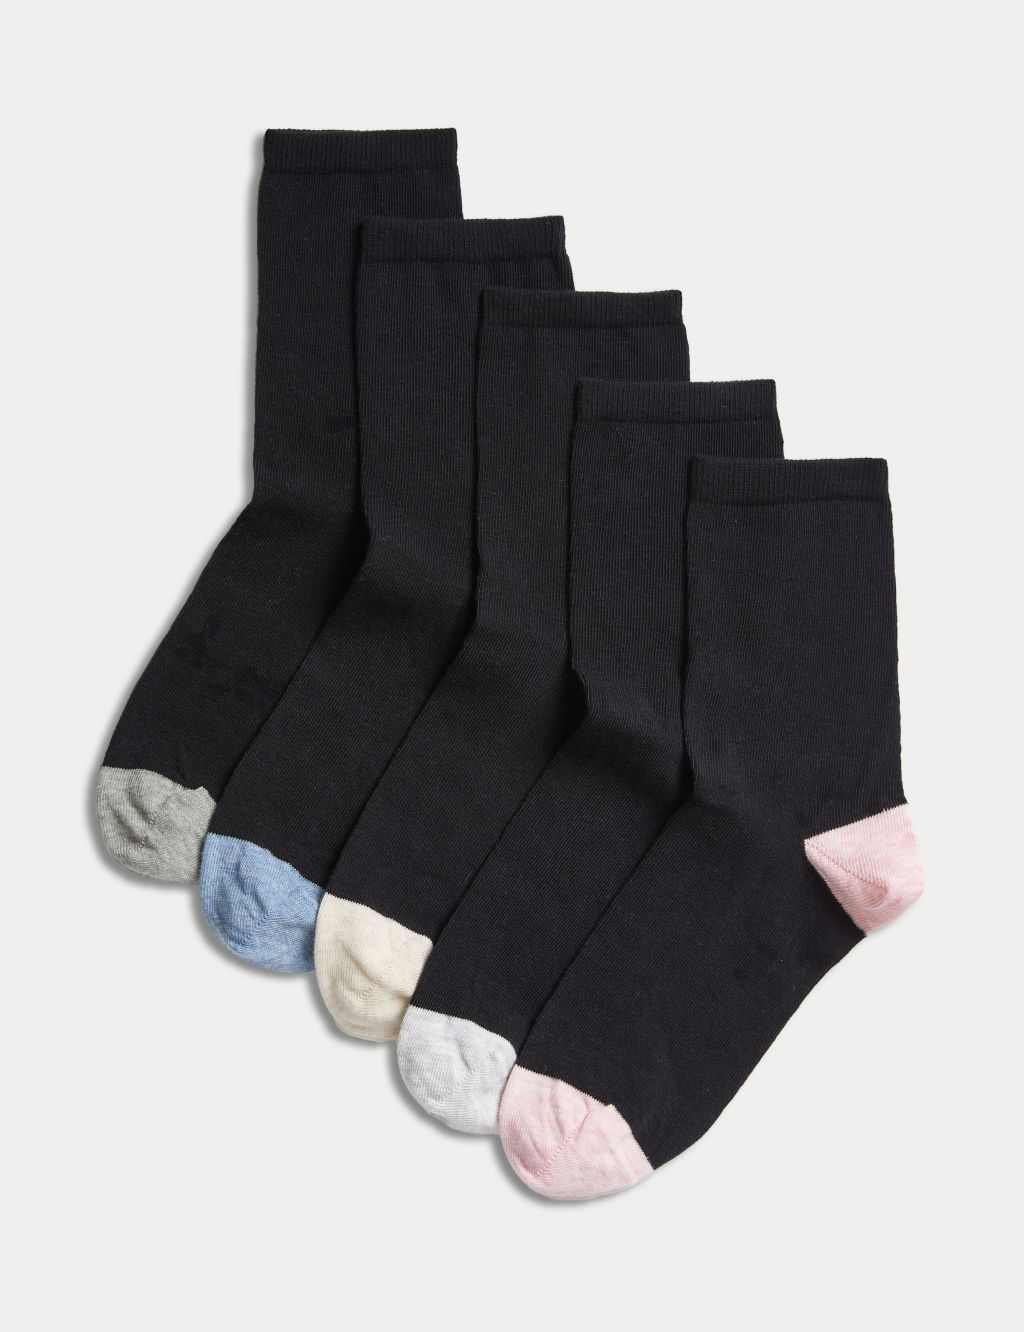 5pk Cotton Rich Seamless Toes Ankle High Socks